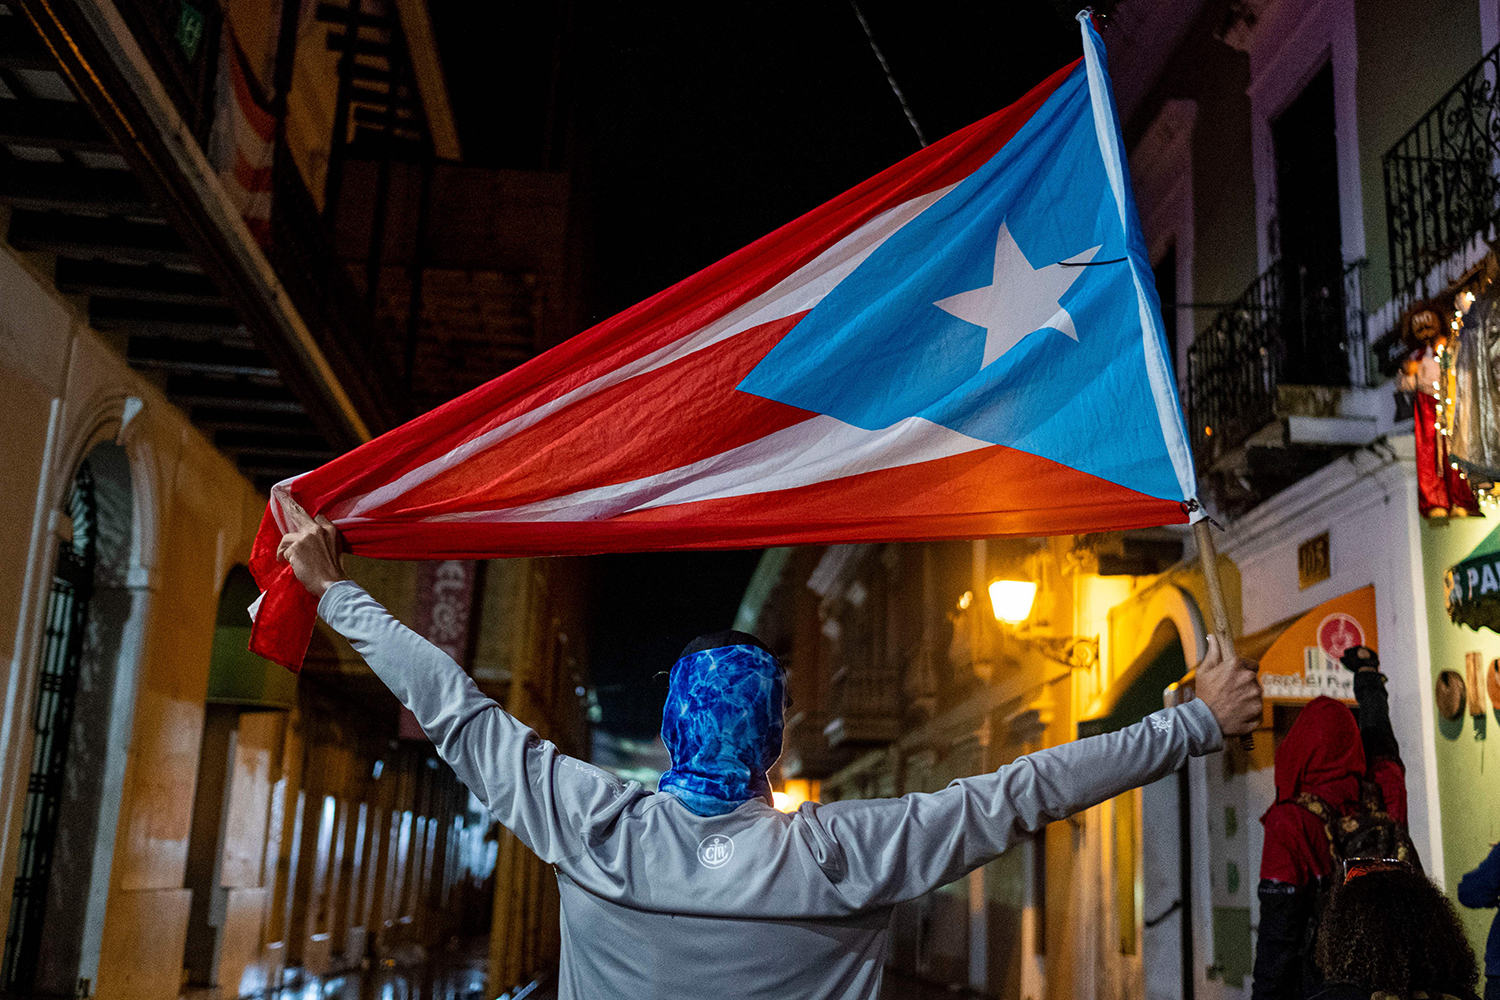 how many people in puerto rico wanted independence after spain ceded the archipelago in 1898